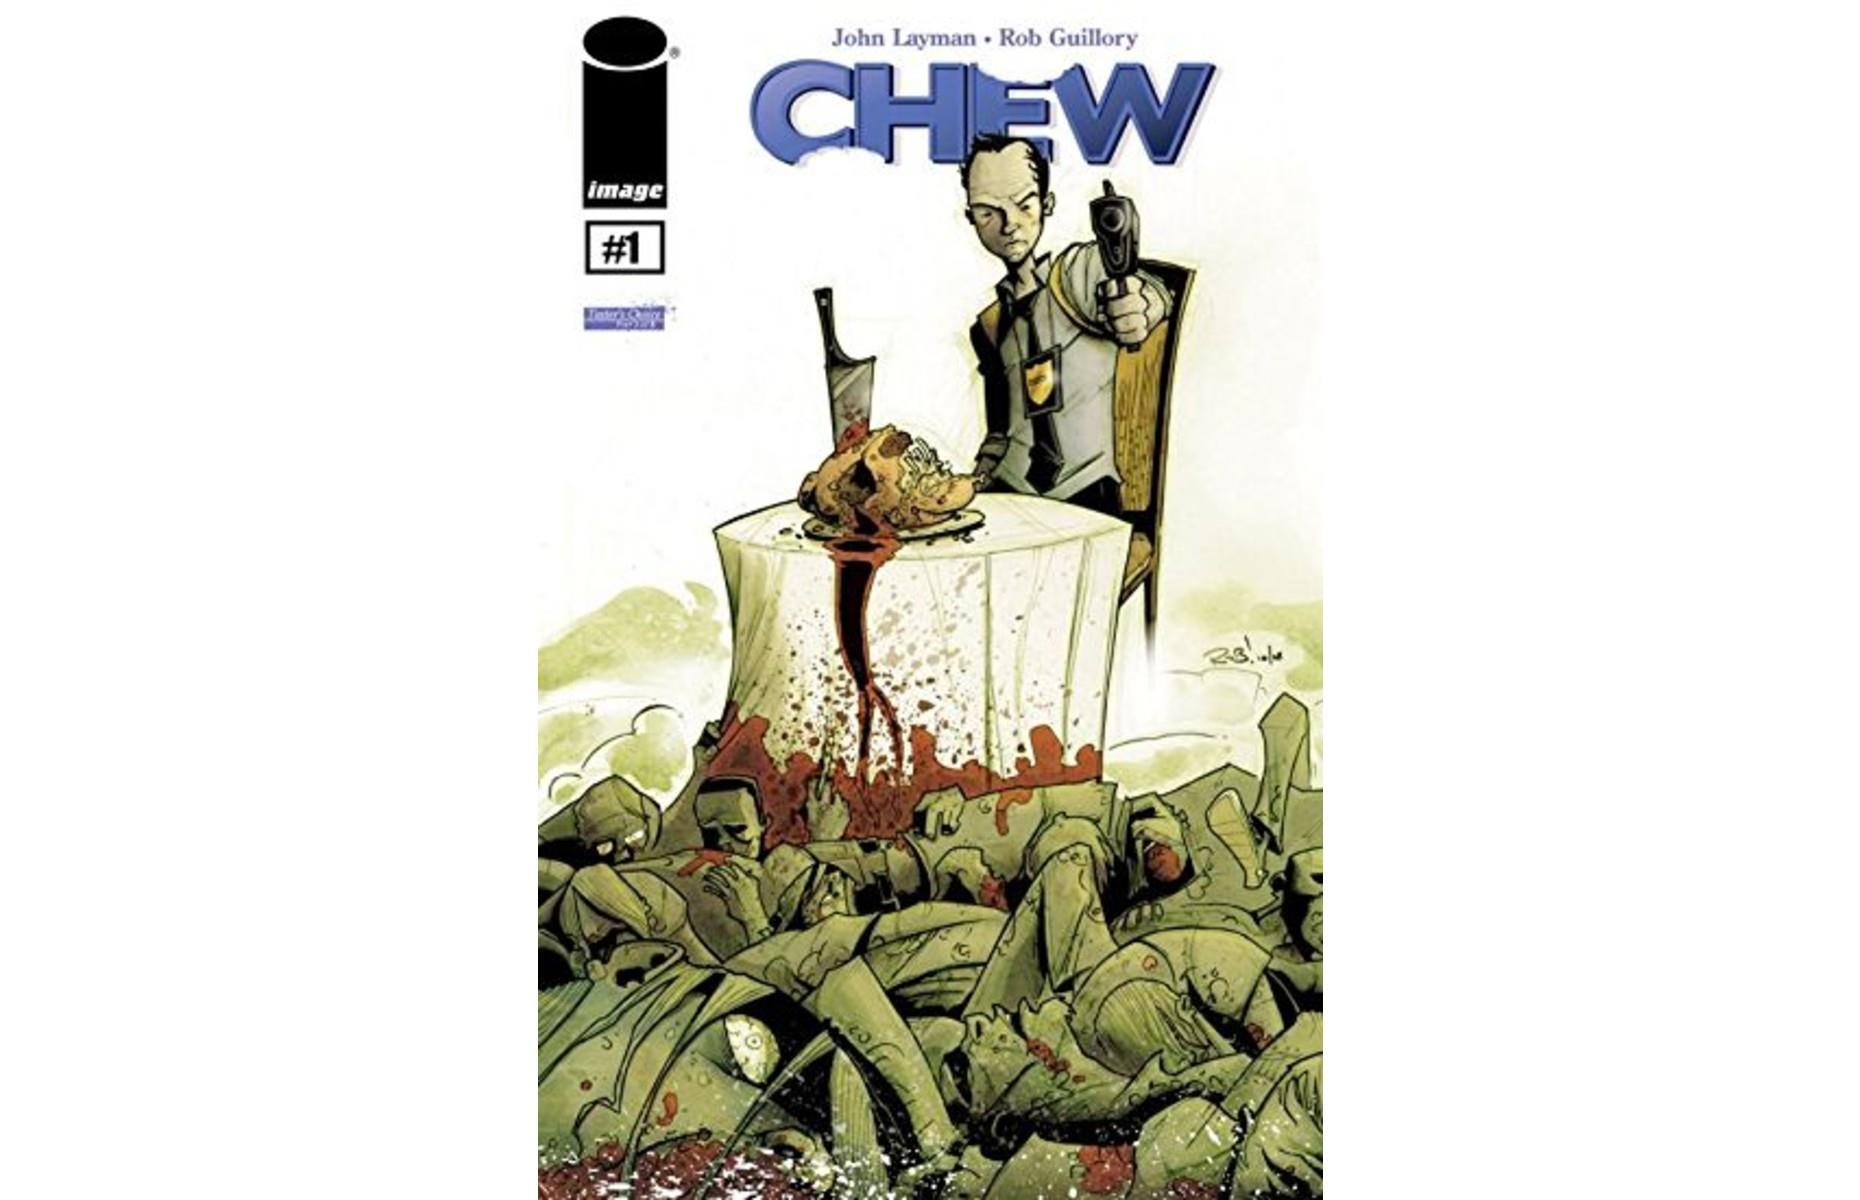 Chew #1: up to £325 ($425)